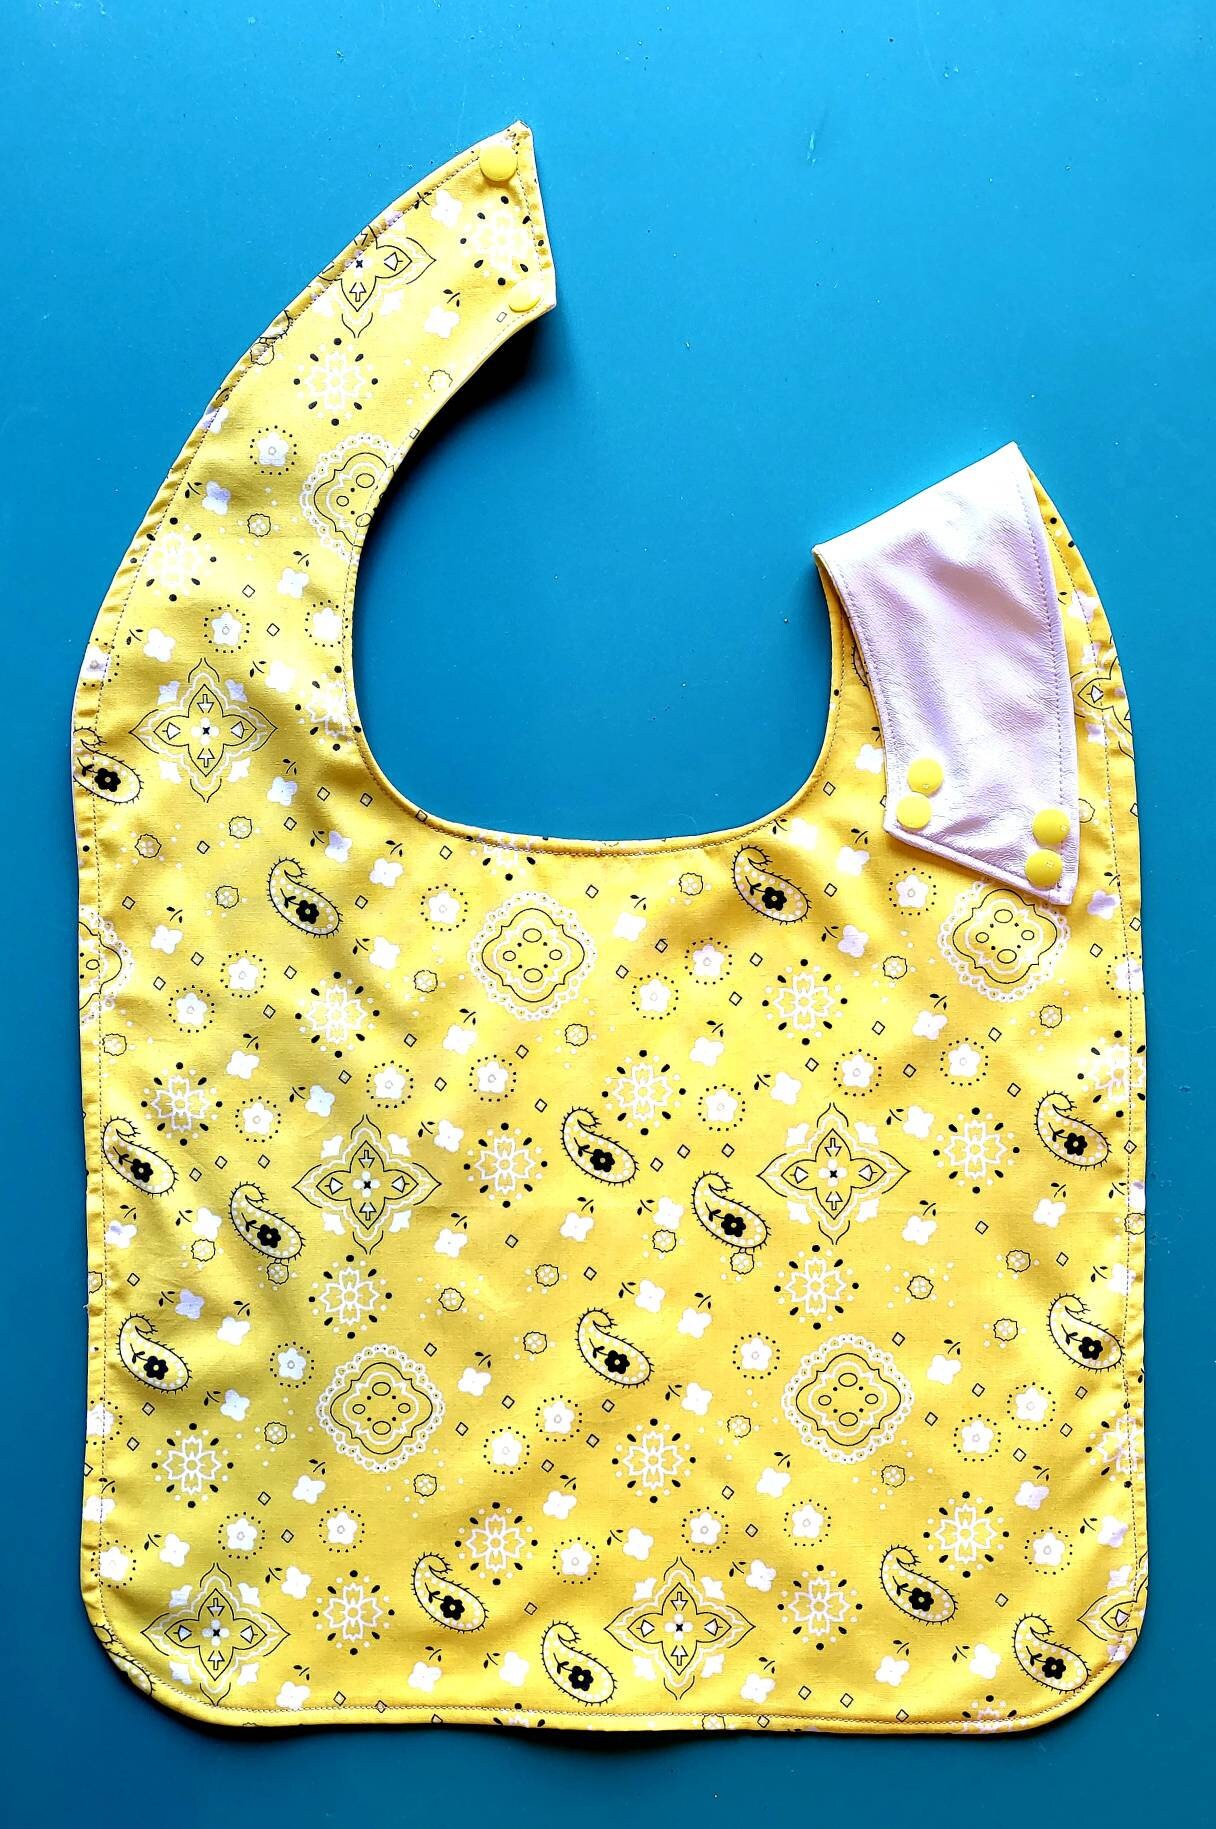 High quality More styles lightweight and comfortable to wear Accessoires Sjaals & omslagdoeken Kragen & slabben Bib/clothing protector is made of cotton fabric Bib is soft Top buy. 